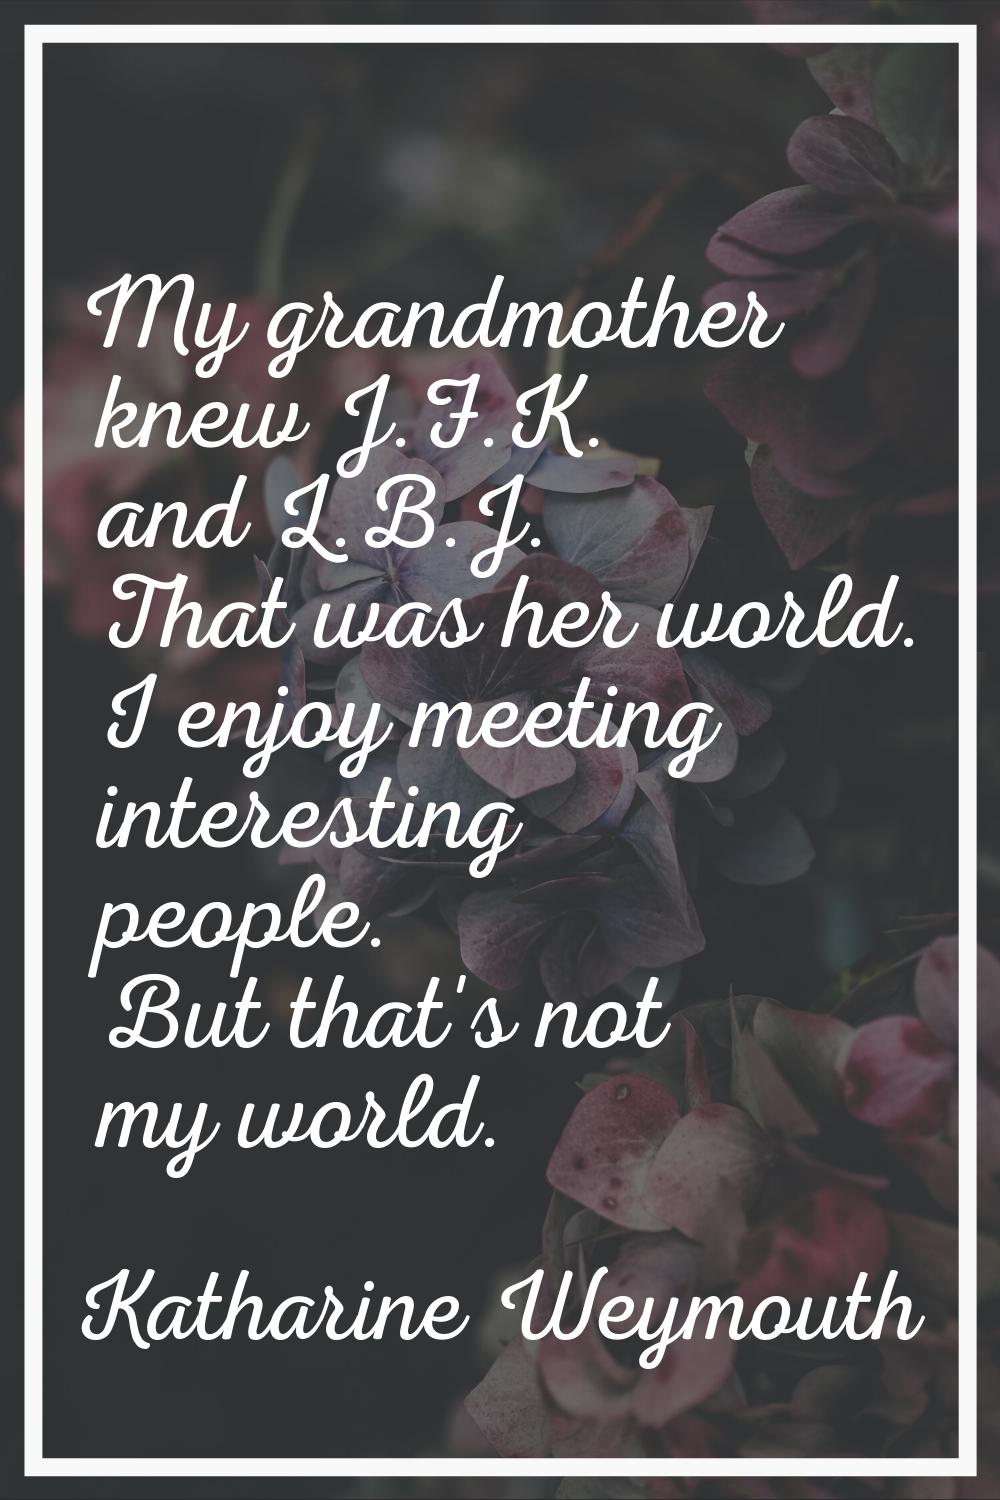 My grandmother knew J.F.K. and L.B.J. That was her world. I enjoy meeting interesting people. But t